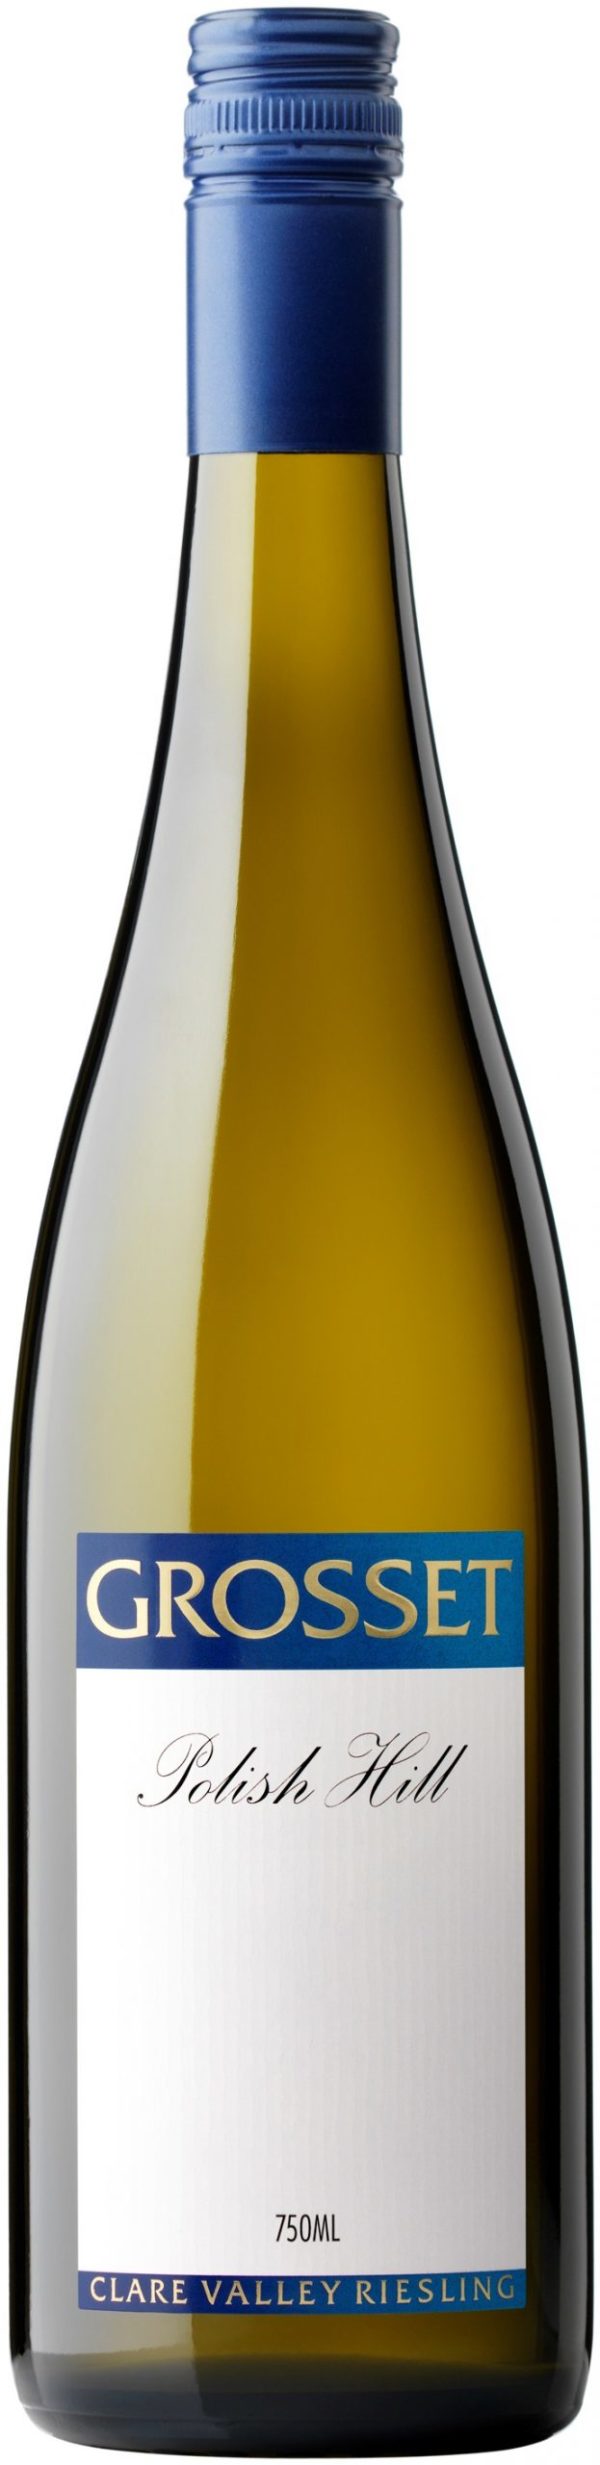 Grosset ‘Polish Hill’ Clare Valley Riesling